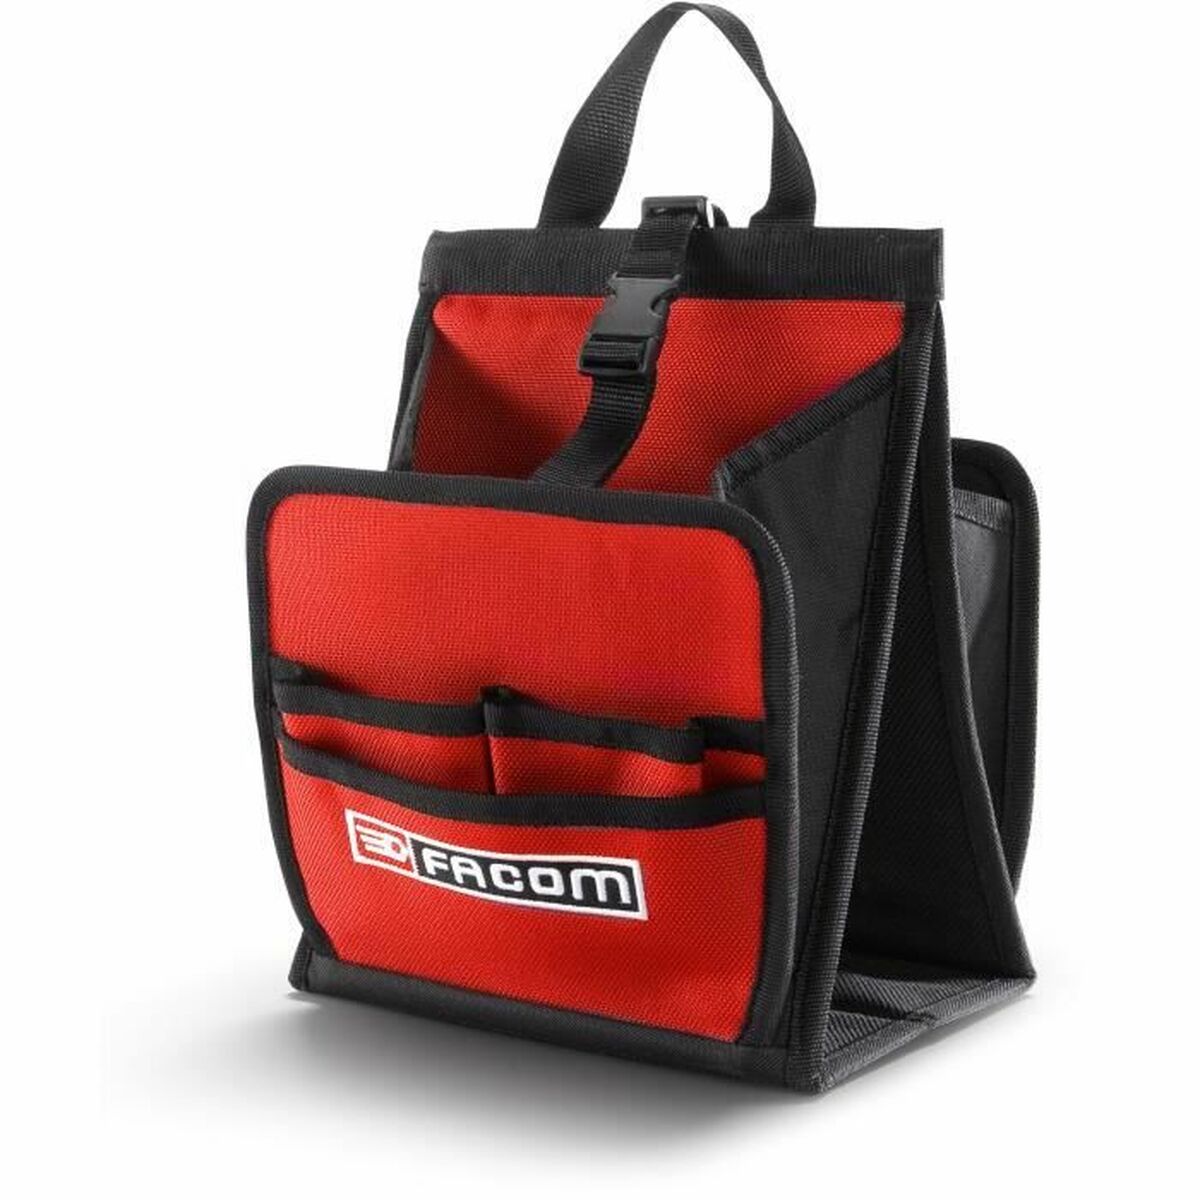 FACOM Tool Bag on wheels for sale in Co. Galway for €110 on DoneDeal